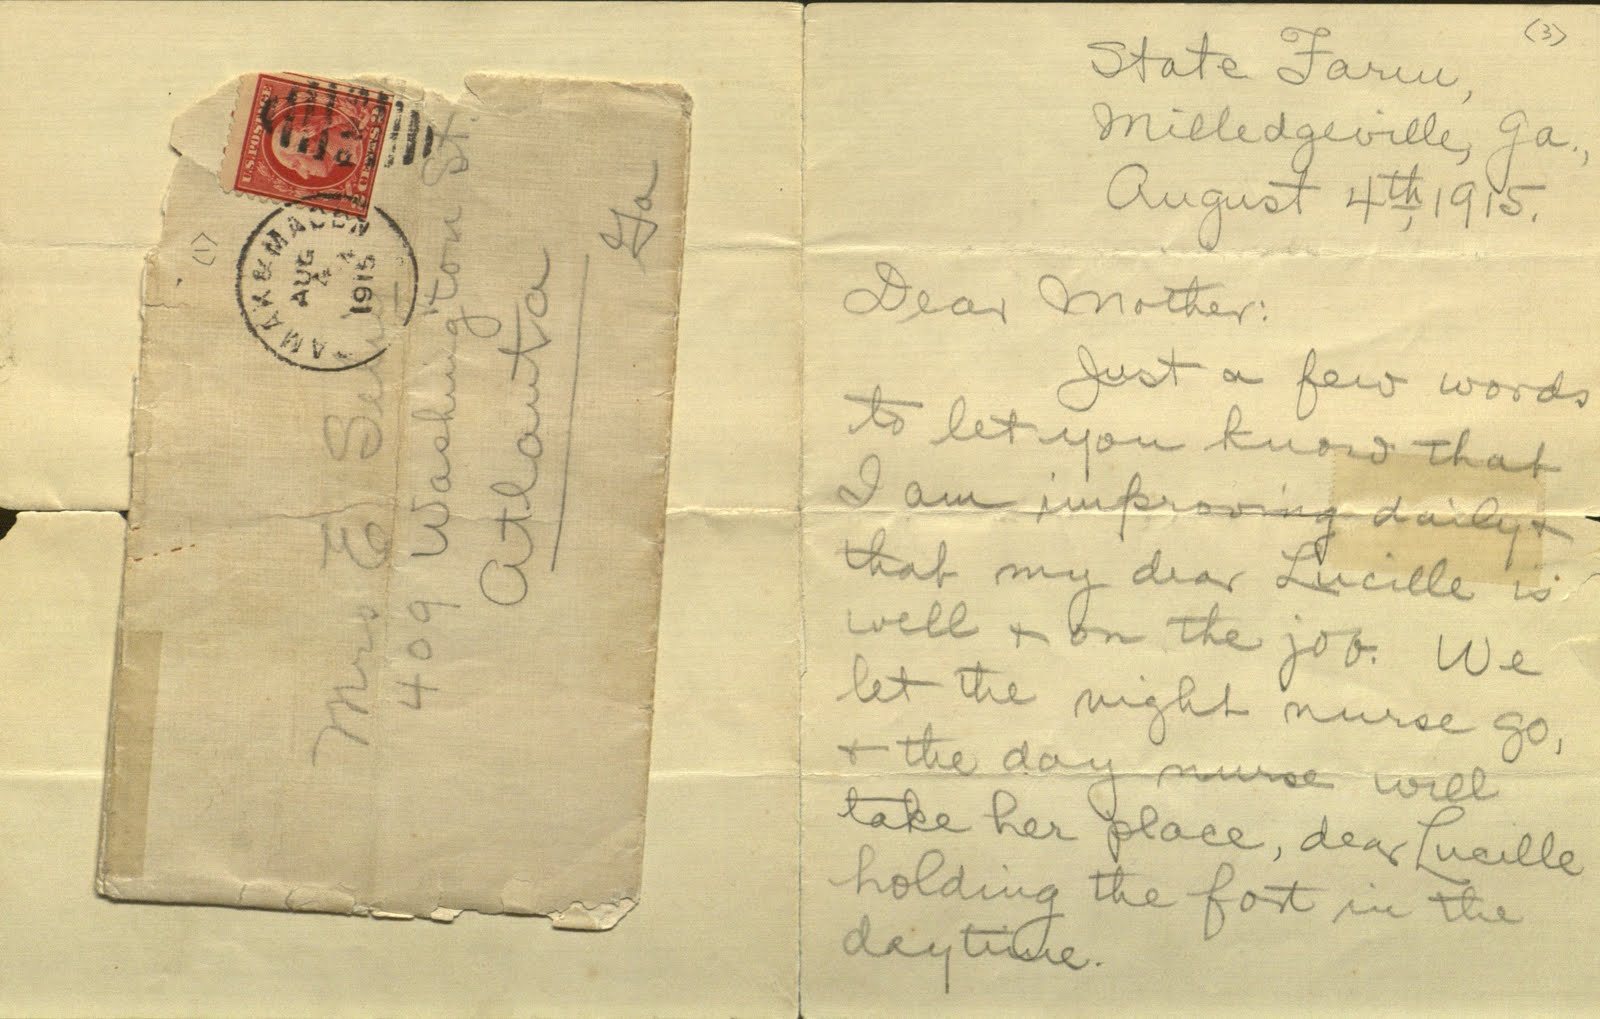 Letter from Leo Frank to his mother-in-law about how well he and Lucille were doing, (August 14, 1915)